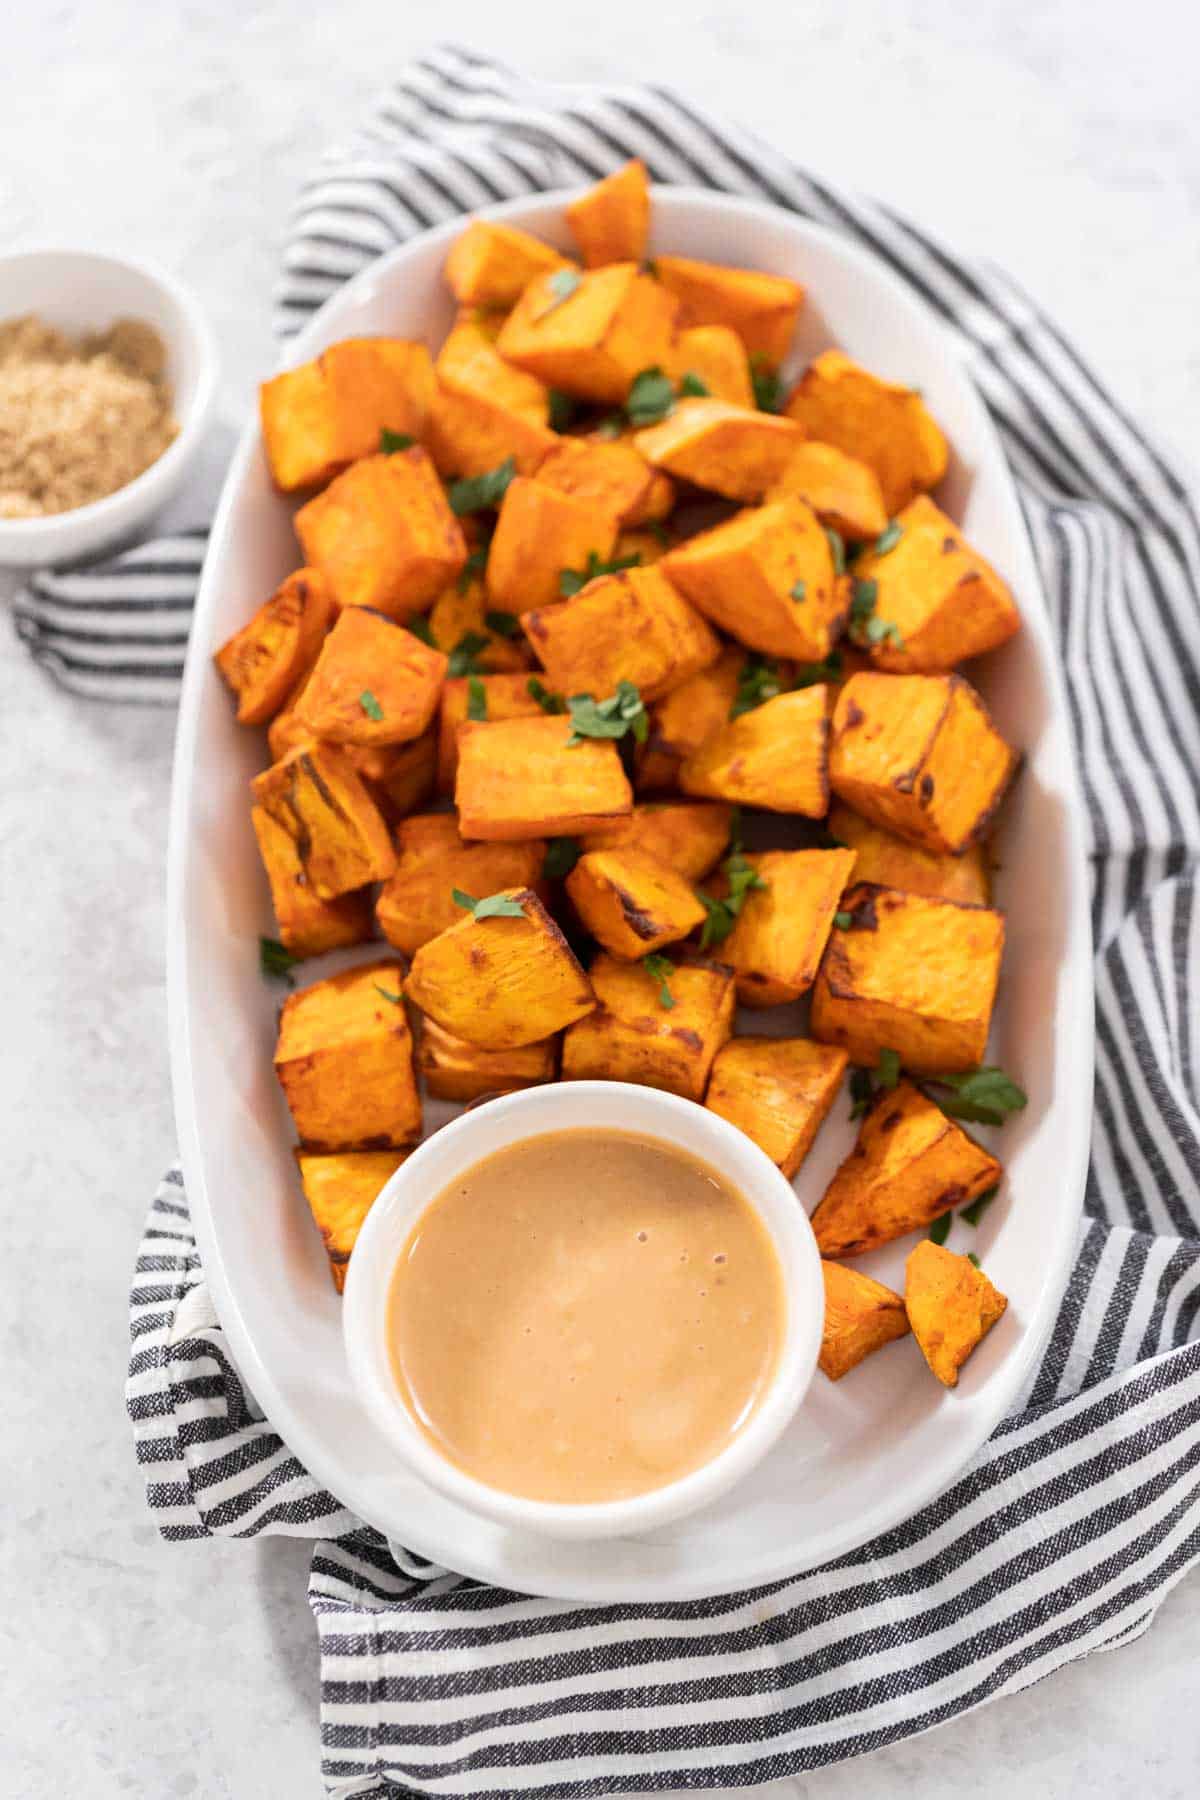 Brown sugar air fryer sweet potato cubes on a white plate, sauce in a white bowl and both are sitting upon a grey and white striped towel.